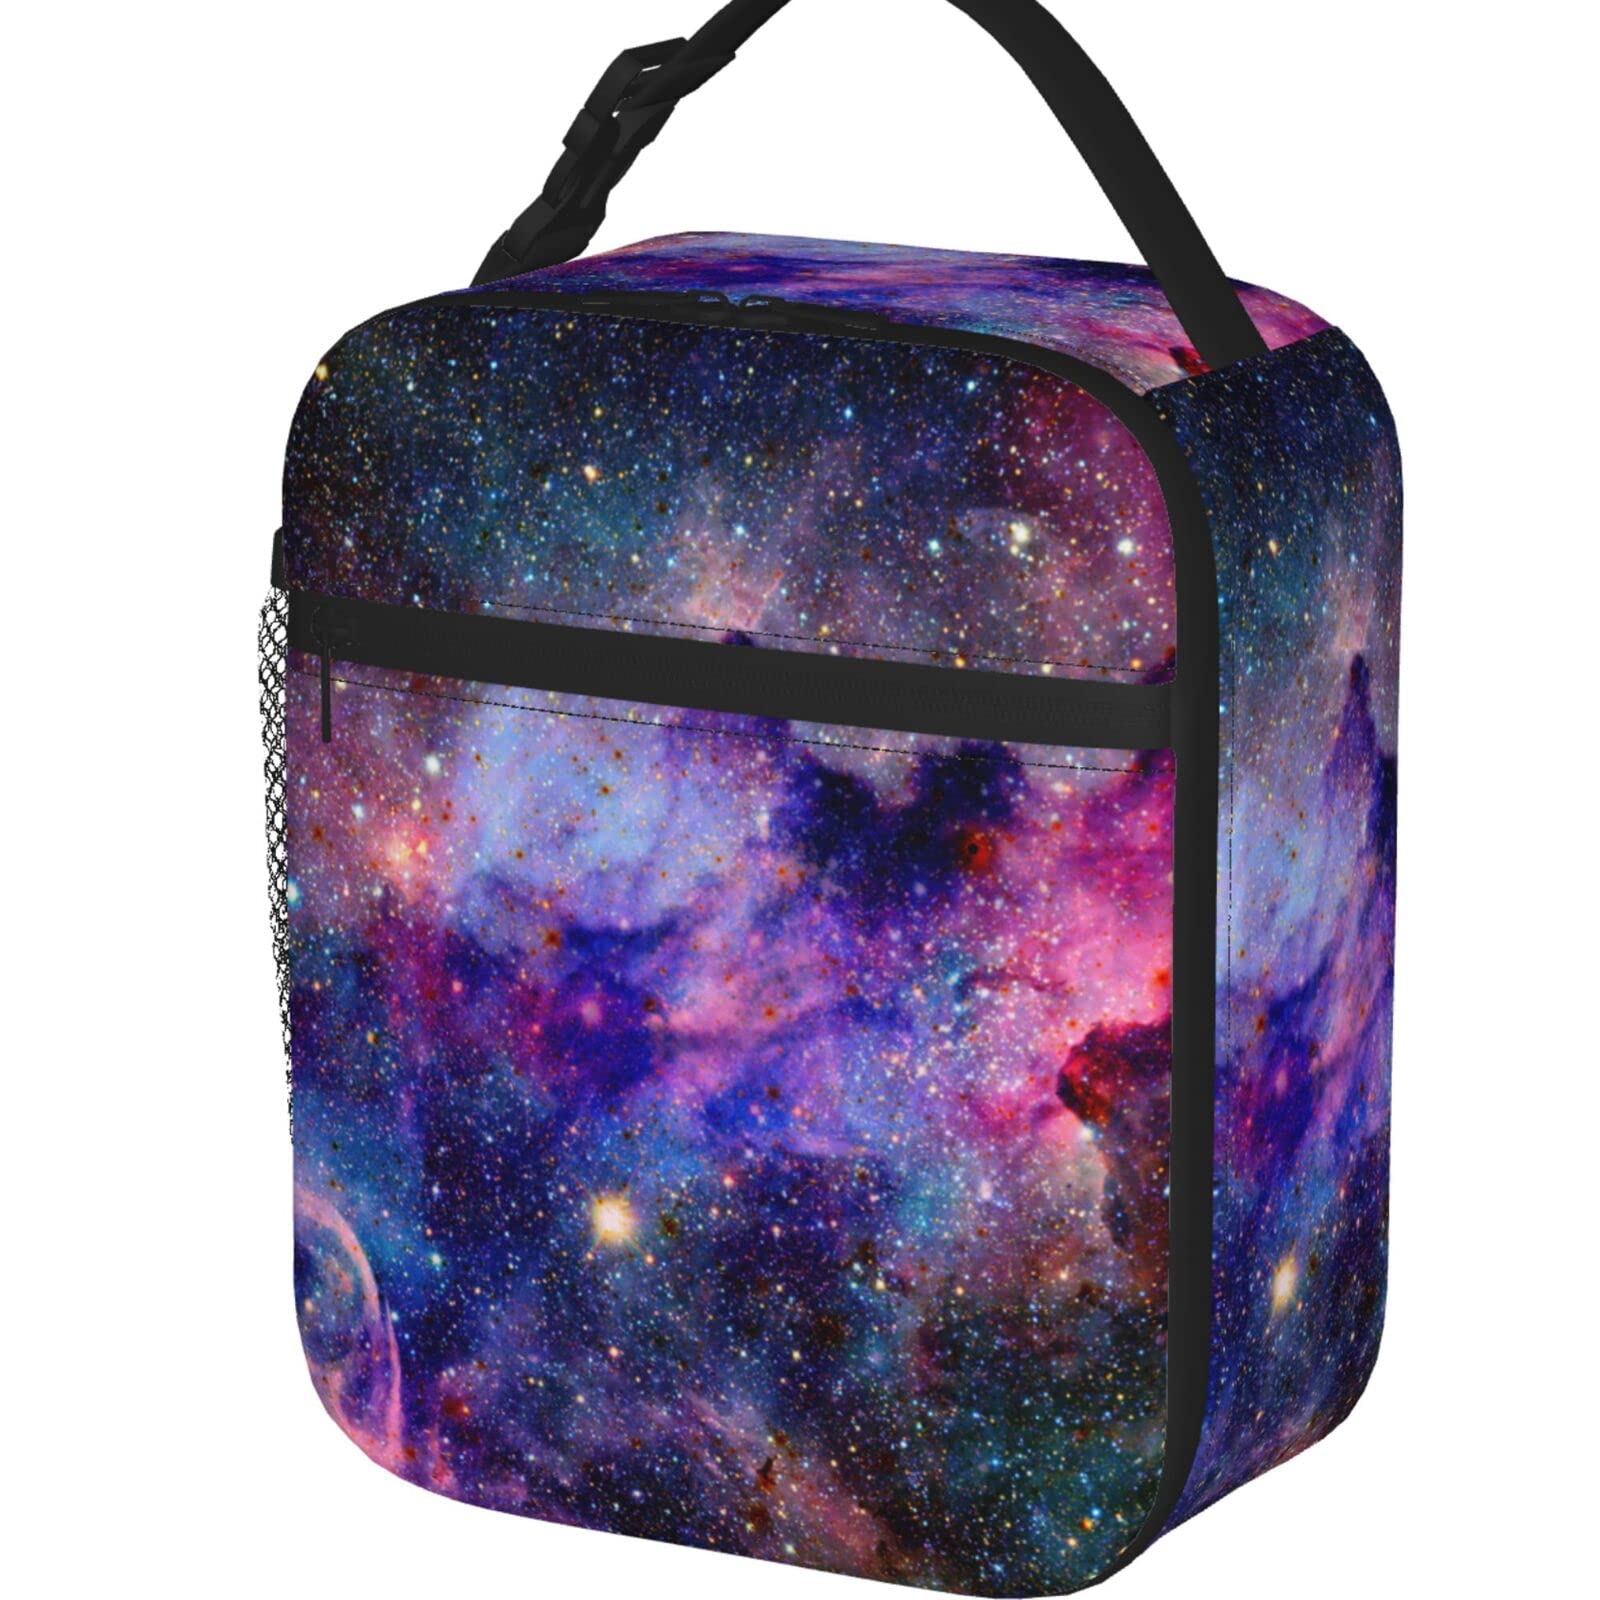 PrelerDIY Galaxies Lunch Box - Insulated Lunch Bags for Women/Men/Girls/Boys Detachable Handle Lunchbox Meal Tote Bag